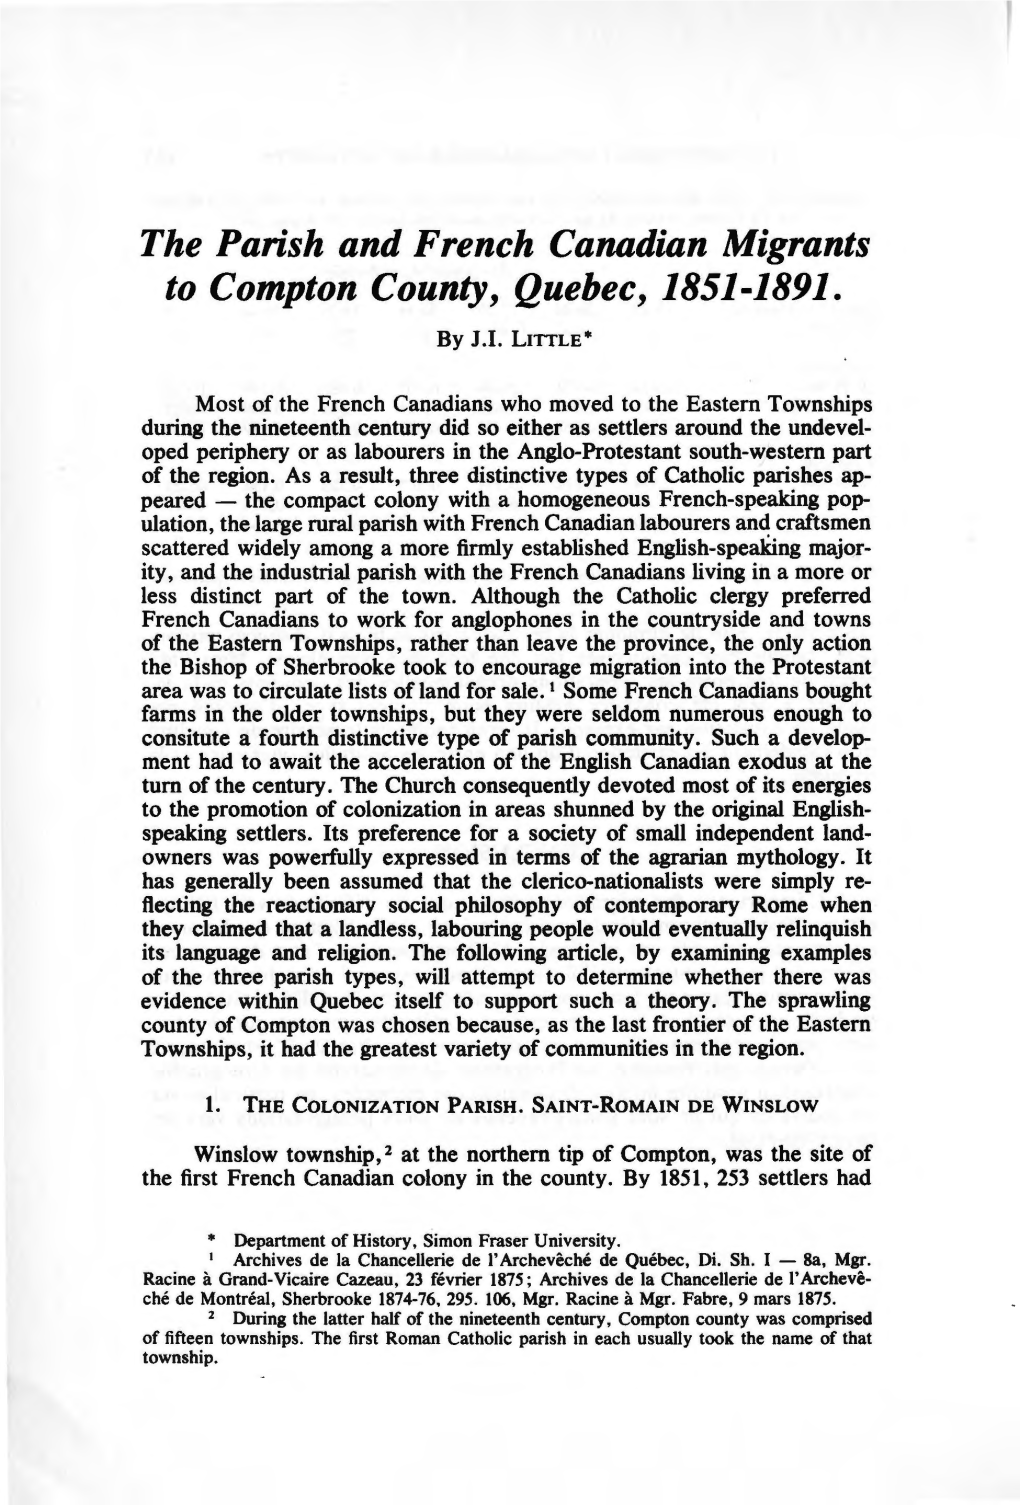 The Parish and French Canadian Migrants to Compton County, Quebec, 1851-1891